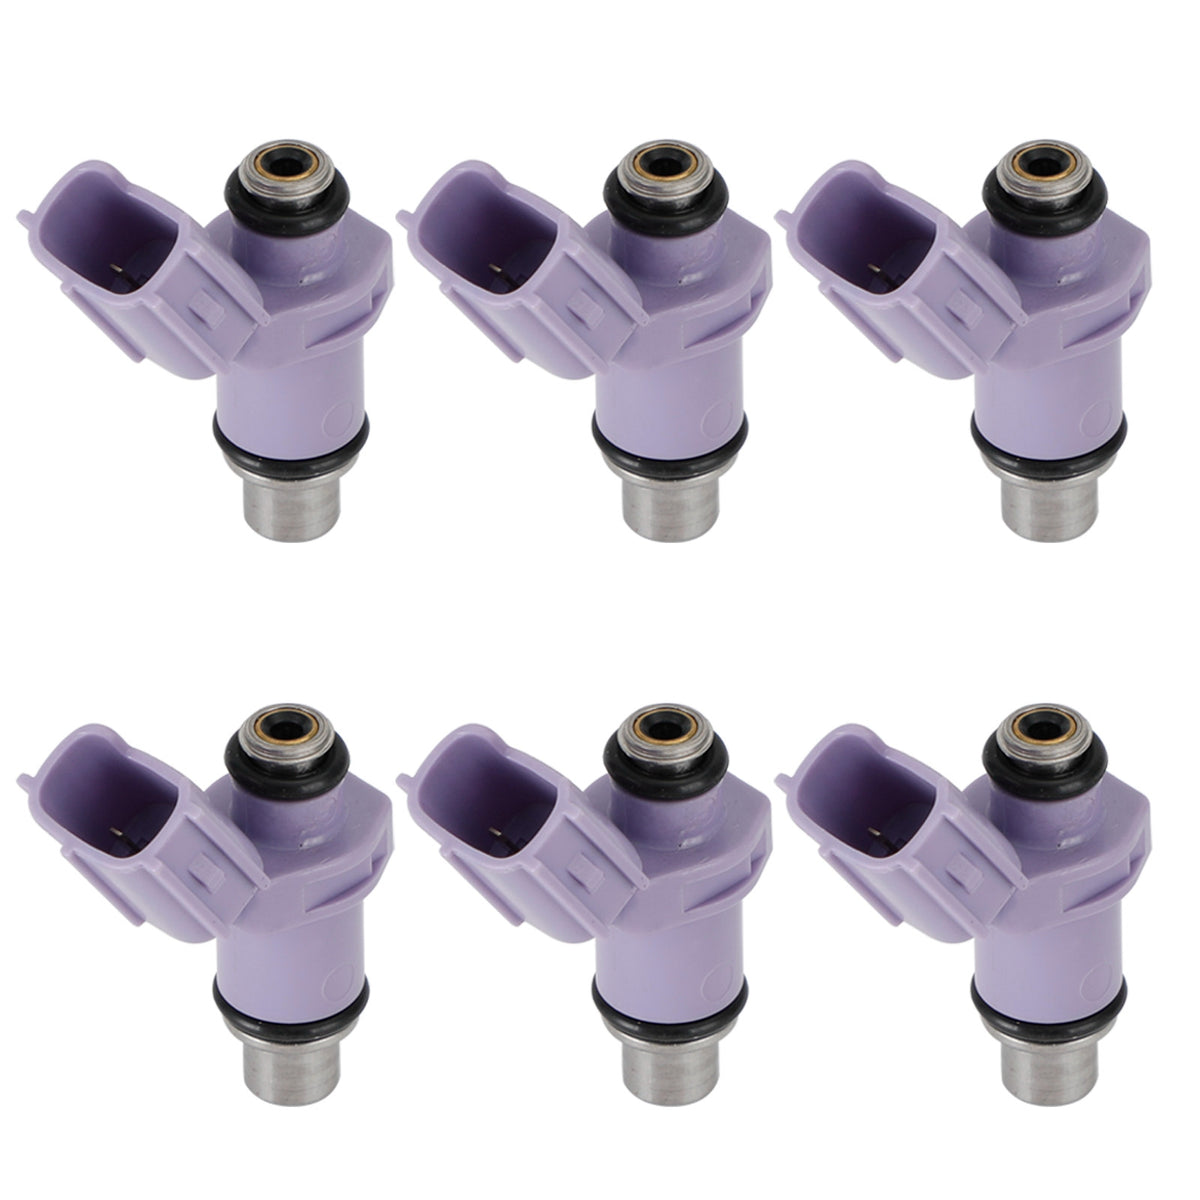 6PCS Fuel Injectors 6P2-13761-10-00 Fit For Yamaha 250 Outboard Generic